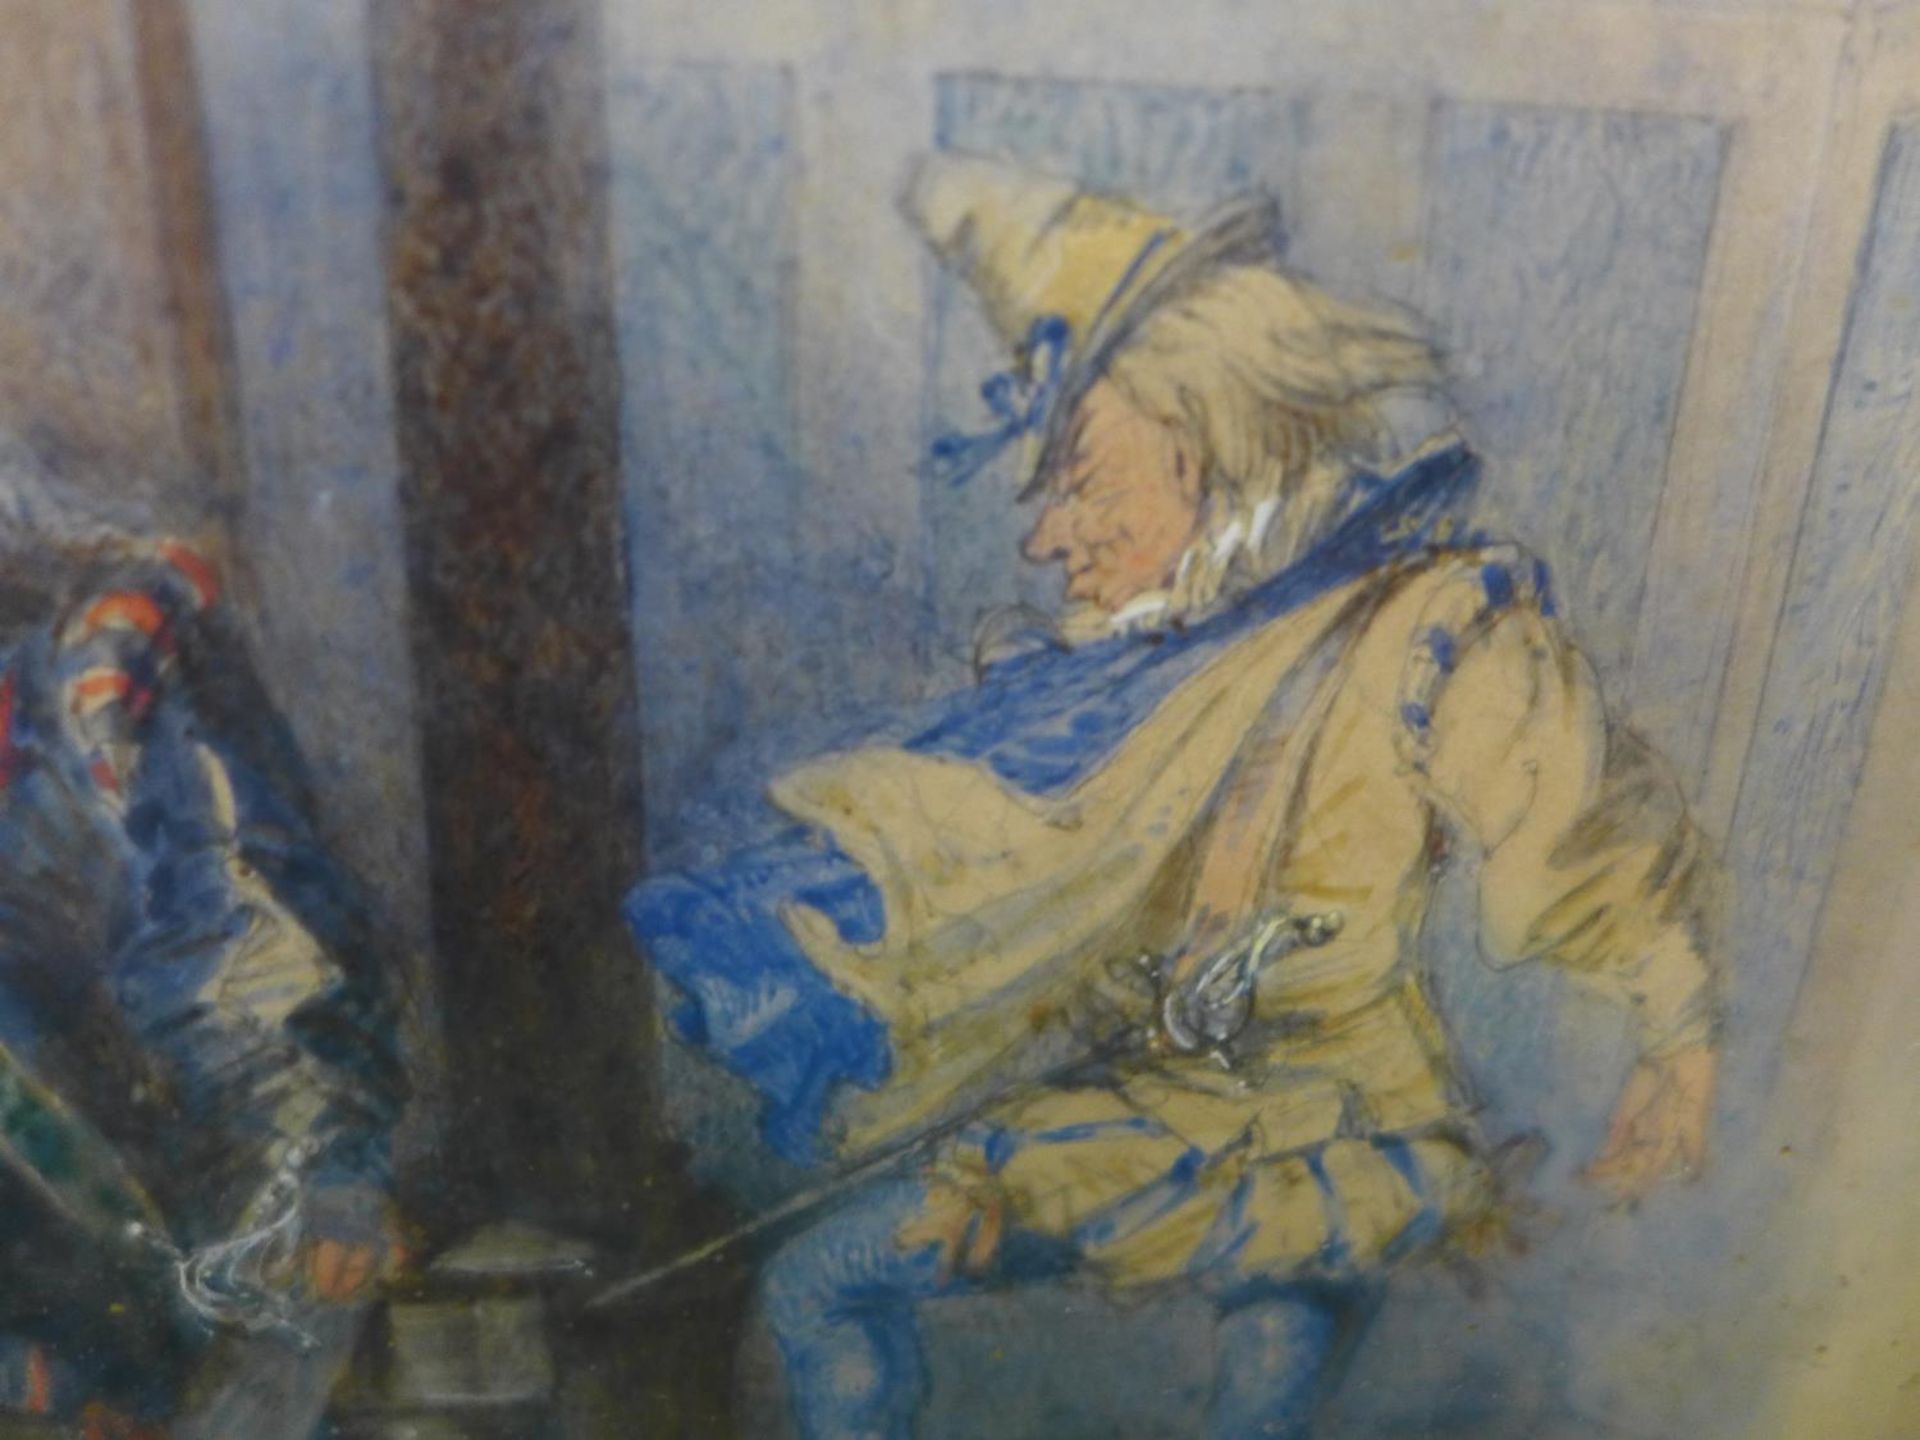 F.J. HOLDING (BRITISH 19TH CENTURY) 'TWELFTH NIGHT', WATERCOLOUR, SIGNED AND DATED 67 LOWER LEFT, - Image 3 of 6